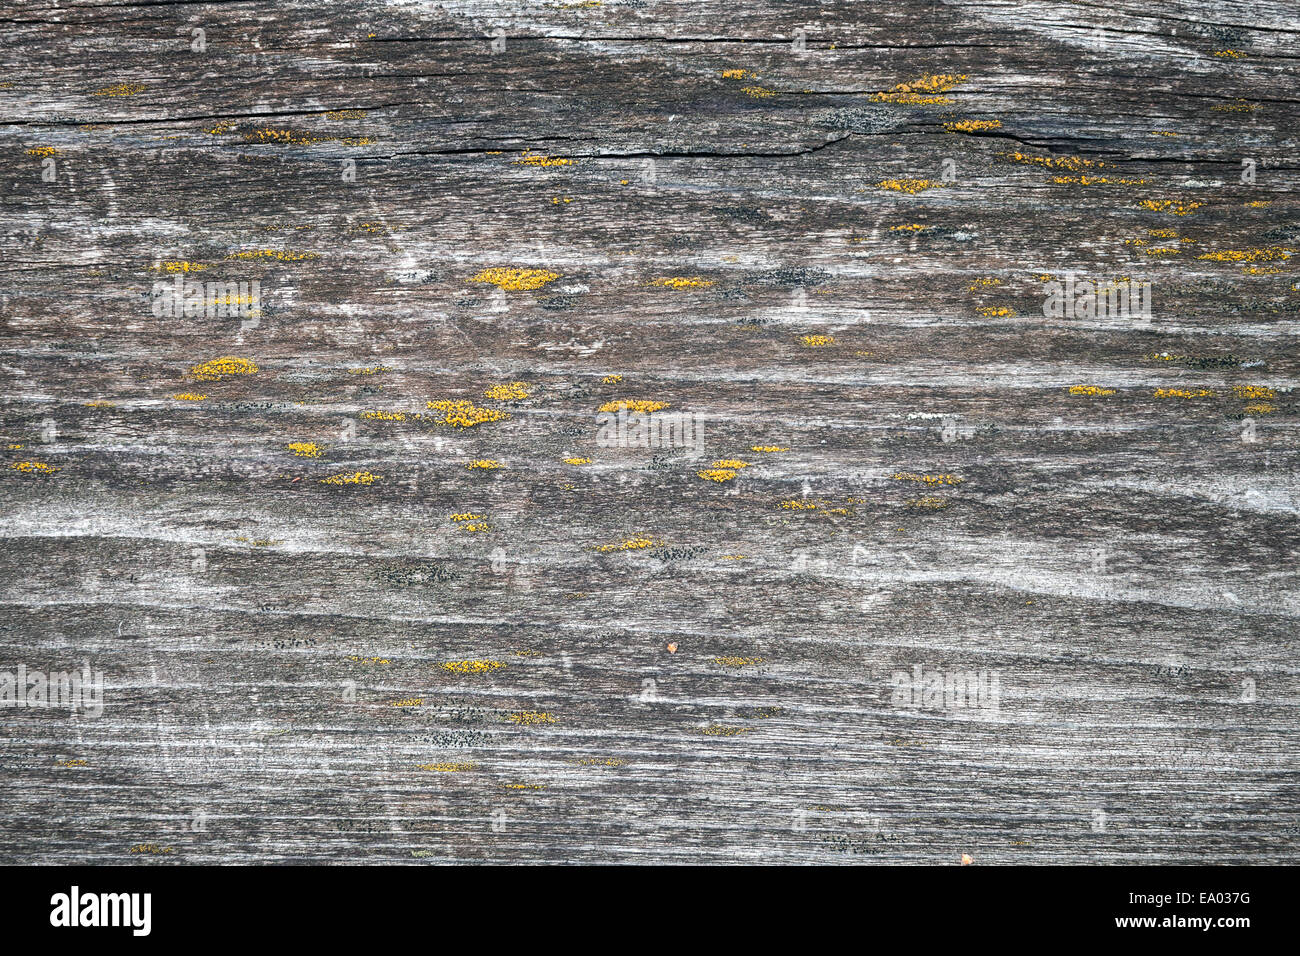 Dark old wooden board with yellow lichen, closeup background photo texture Stock Photo